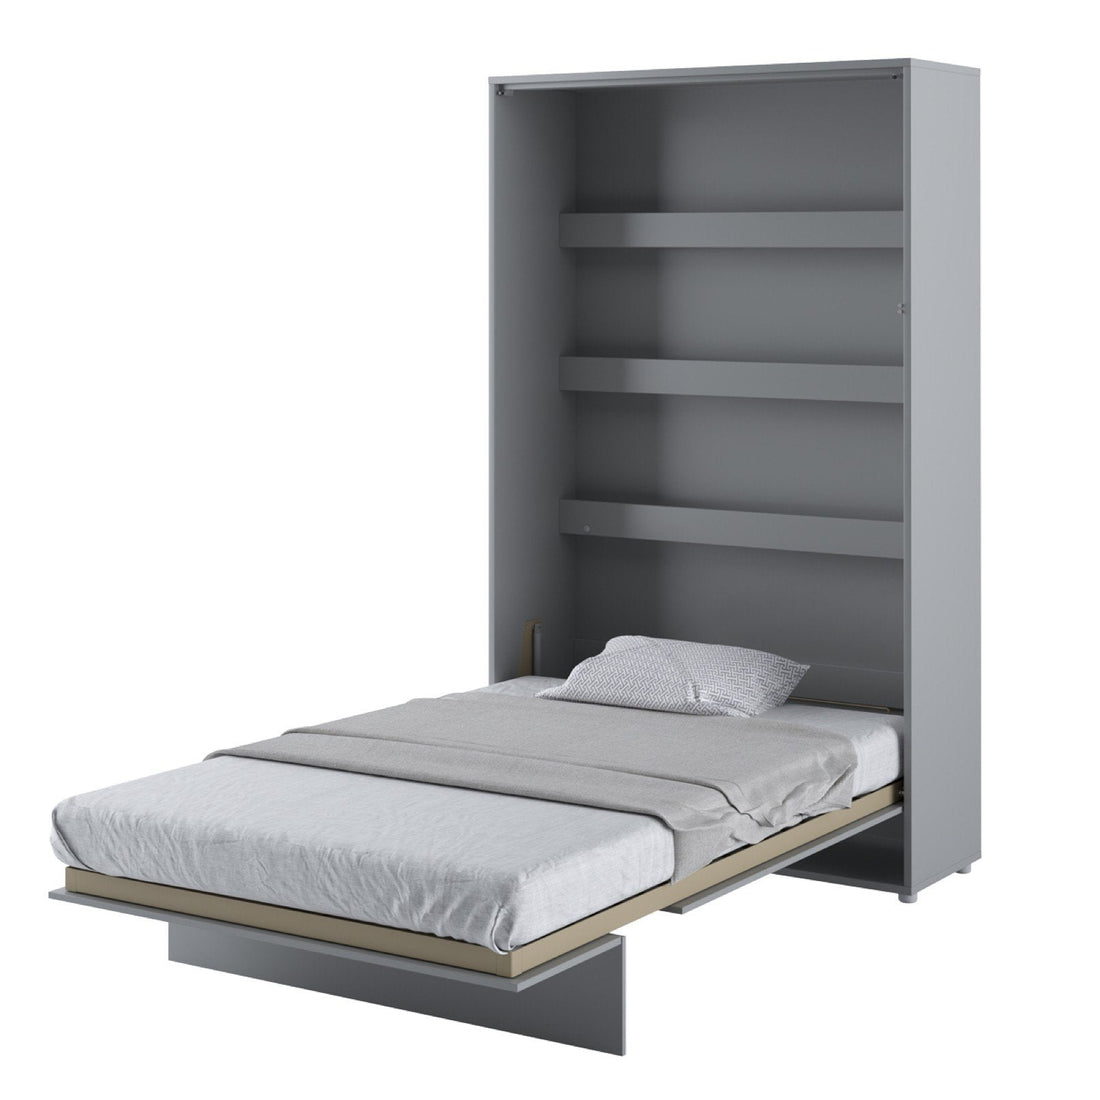 BC-02 Vertical Wall Bed Concept 120cm - £865.8 - Wall Bed 